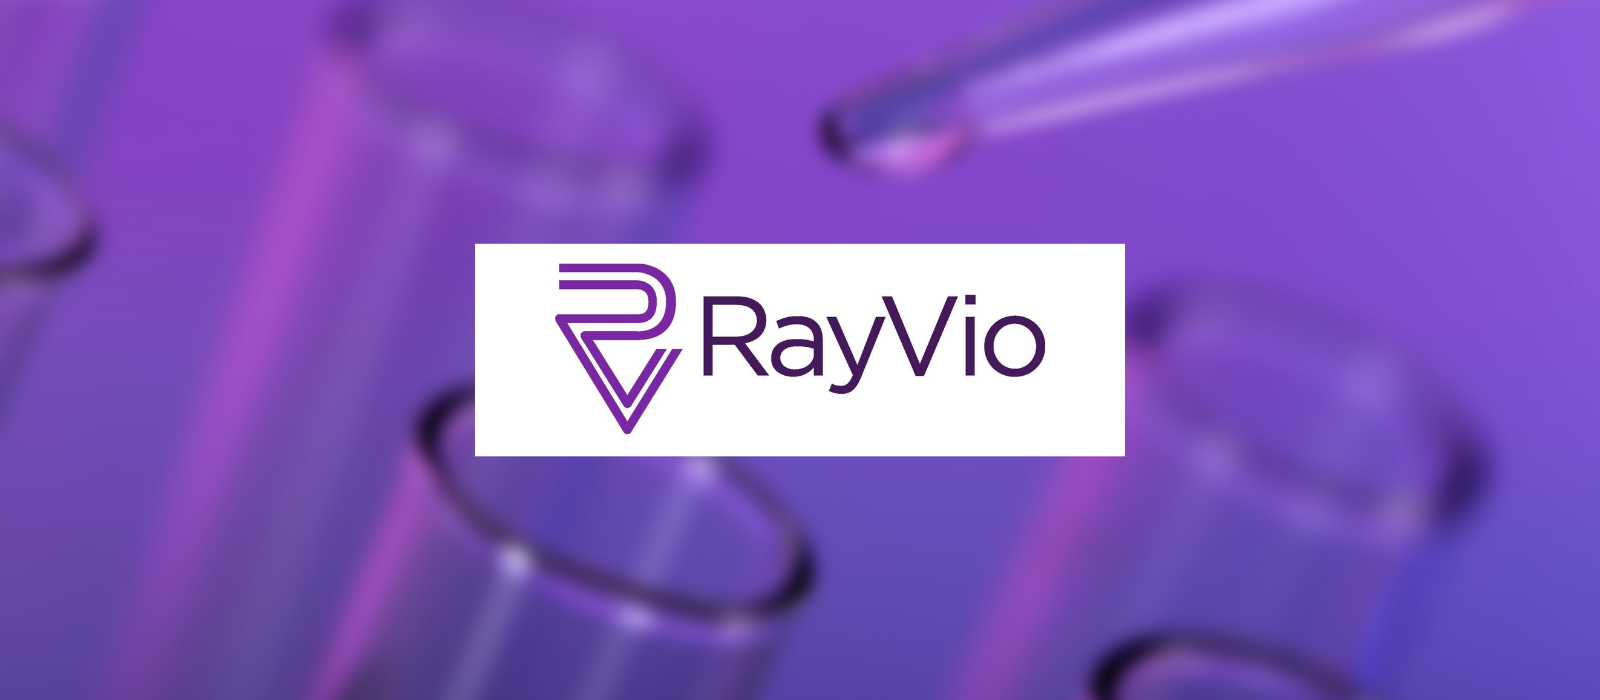 HGP & SVD to Manage Auction of RayVio Assets Beginning Oct 30